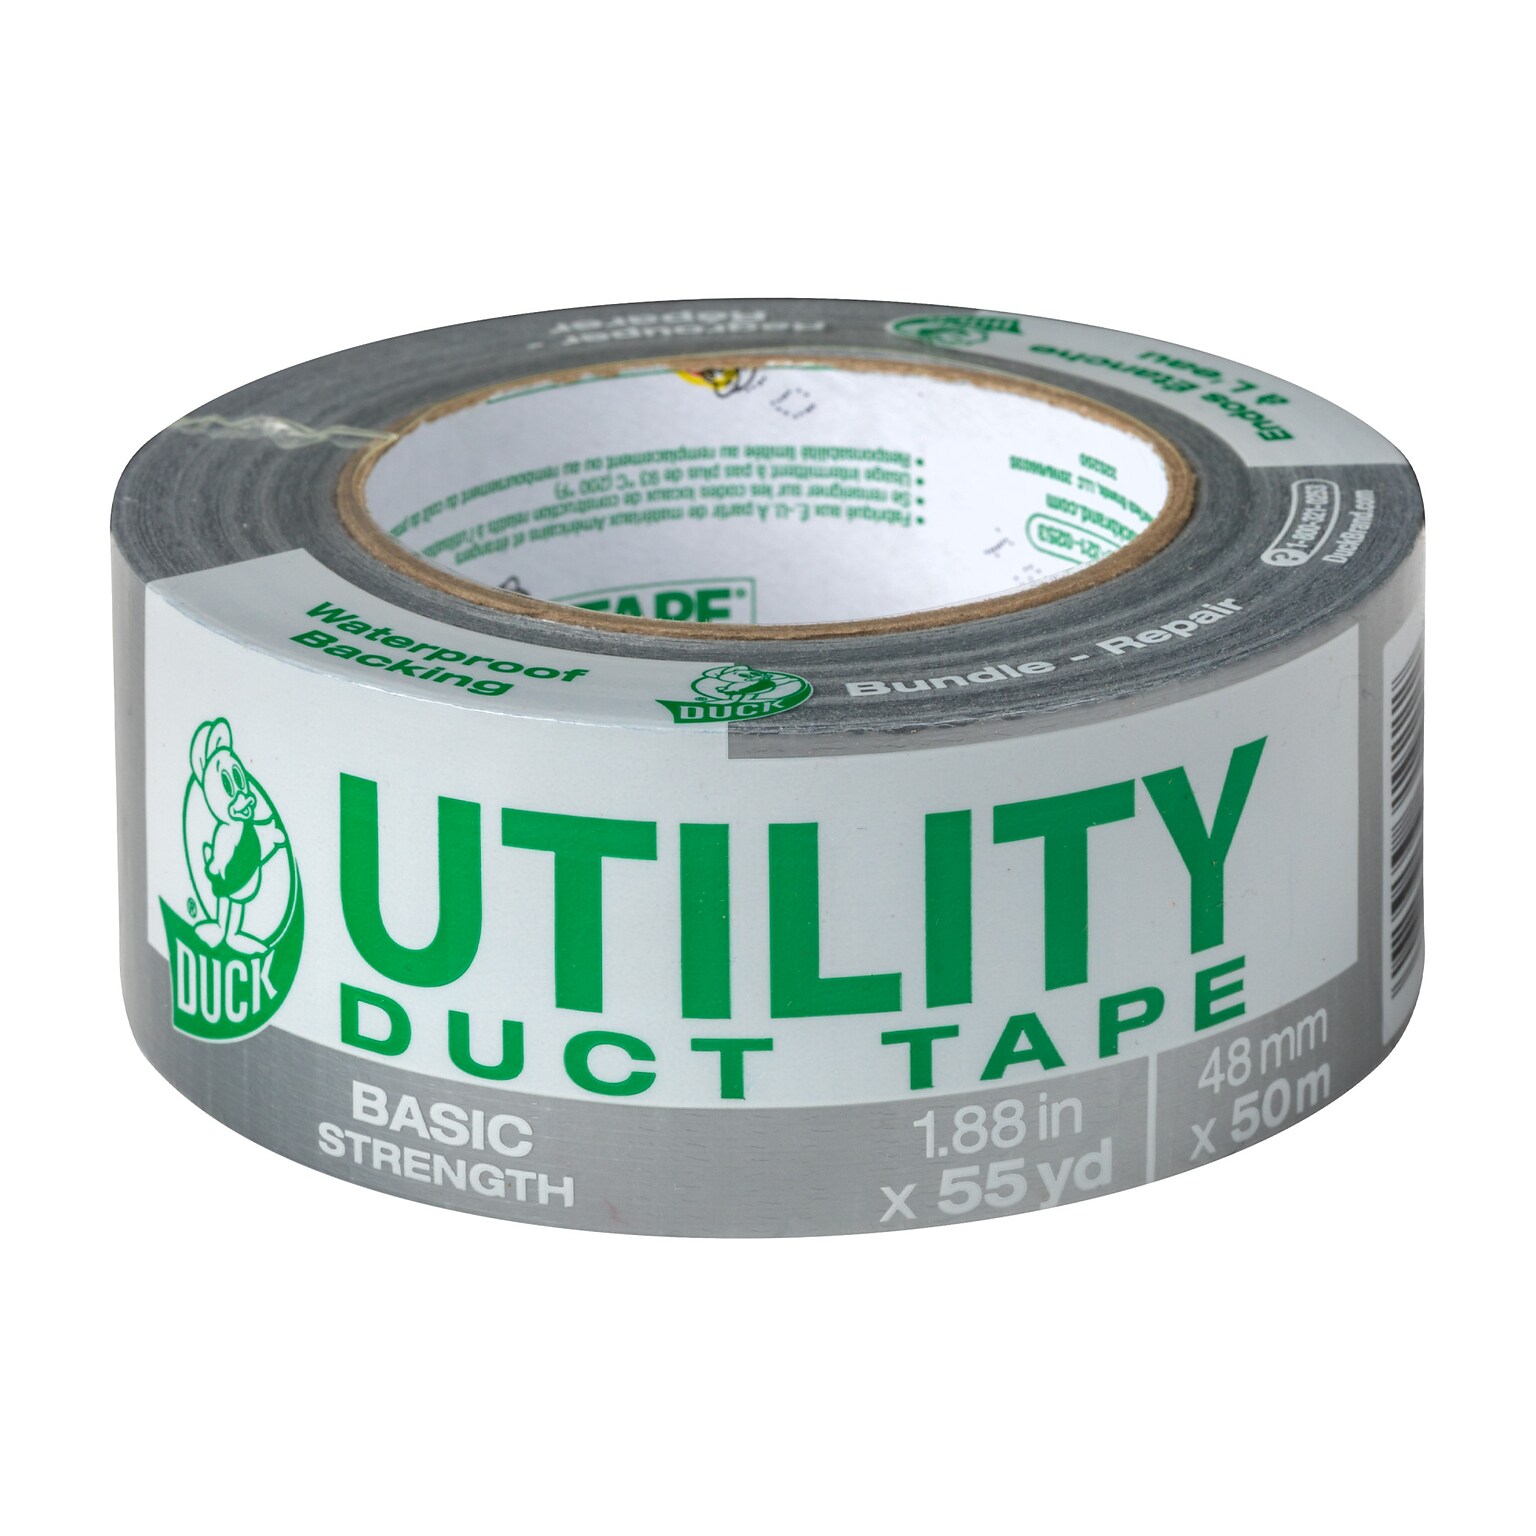 Duck Tape® Brand 1.88 in. x 55 yd. Utility Duct Tape, Silver (242946)